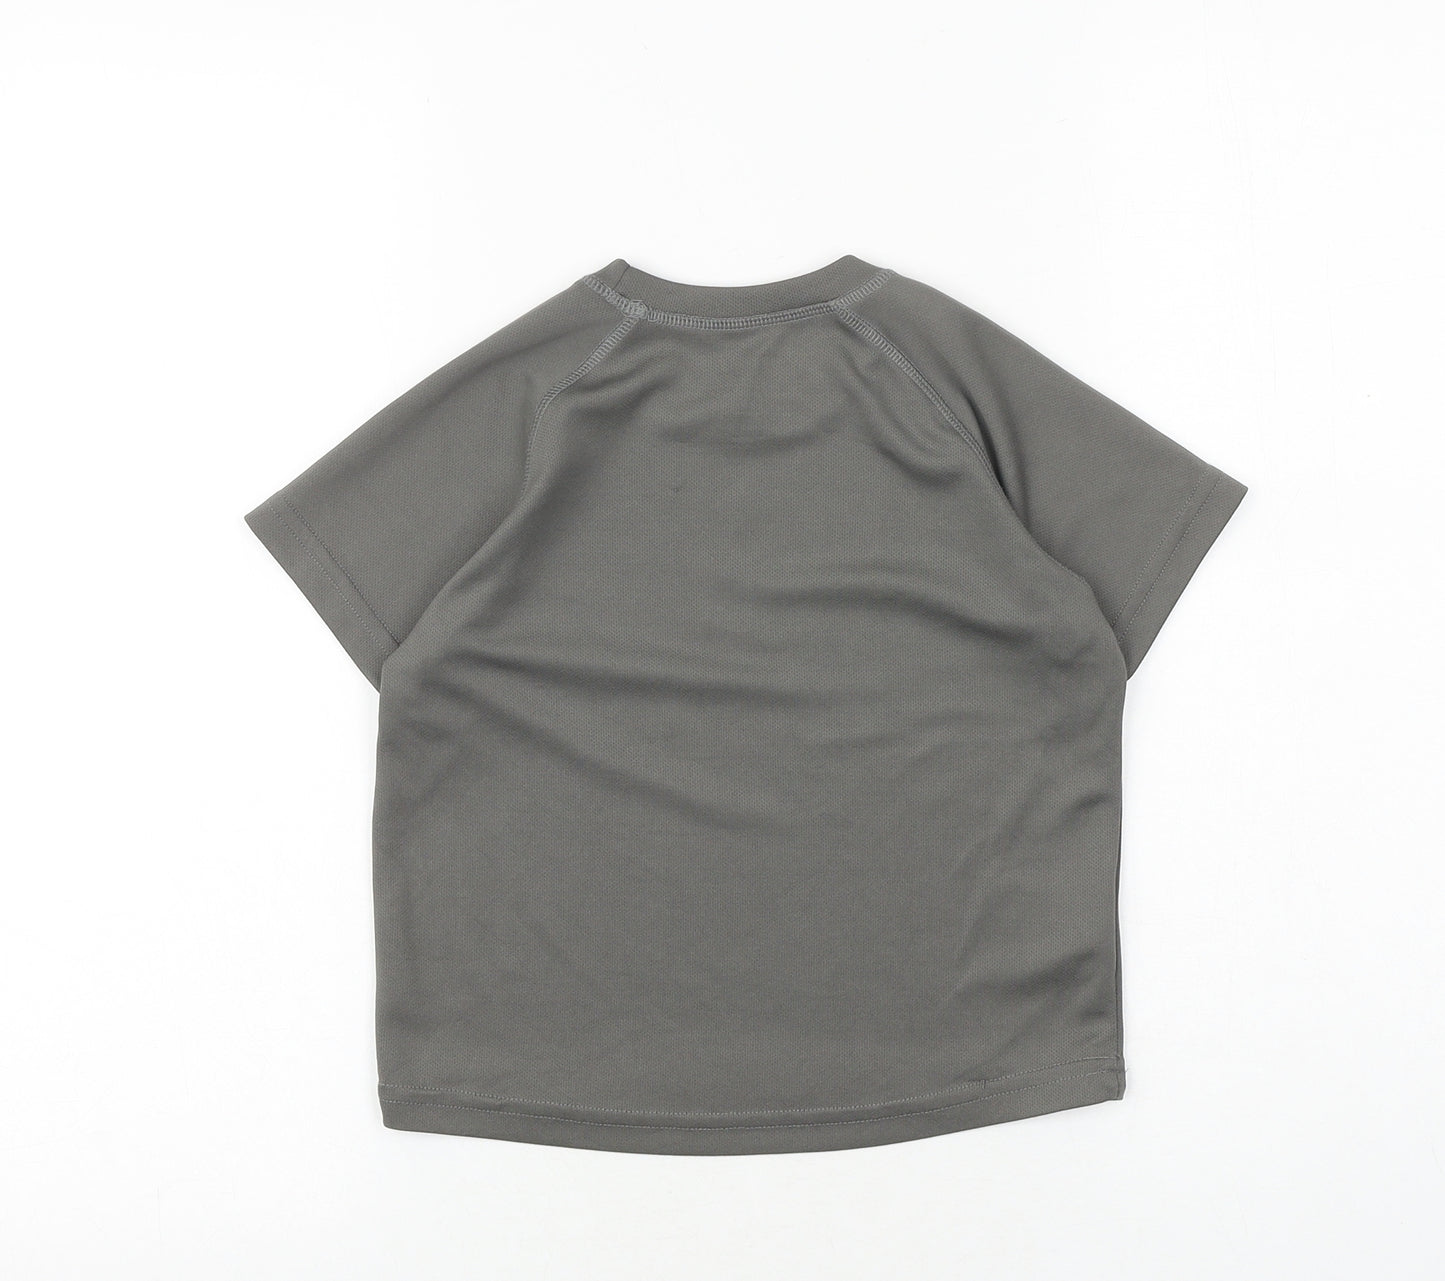 Hi Gear Boys Grey Polyester Basic T-Shirt Size 3-4 Years Round Neck Pullover